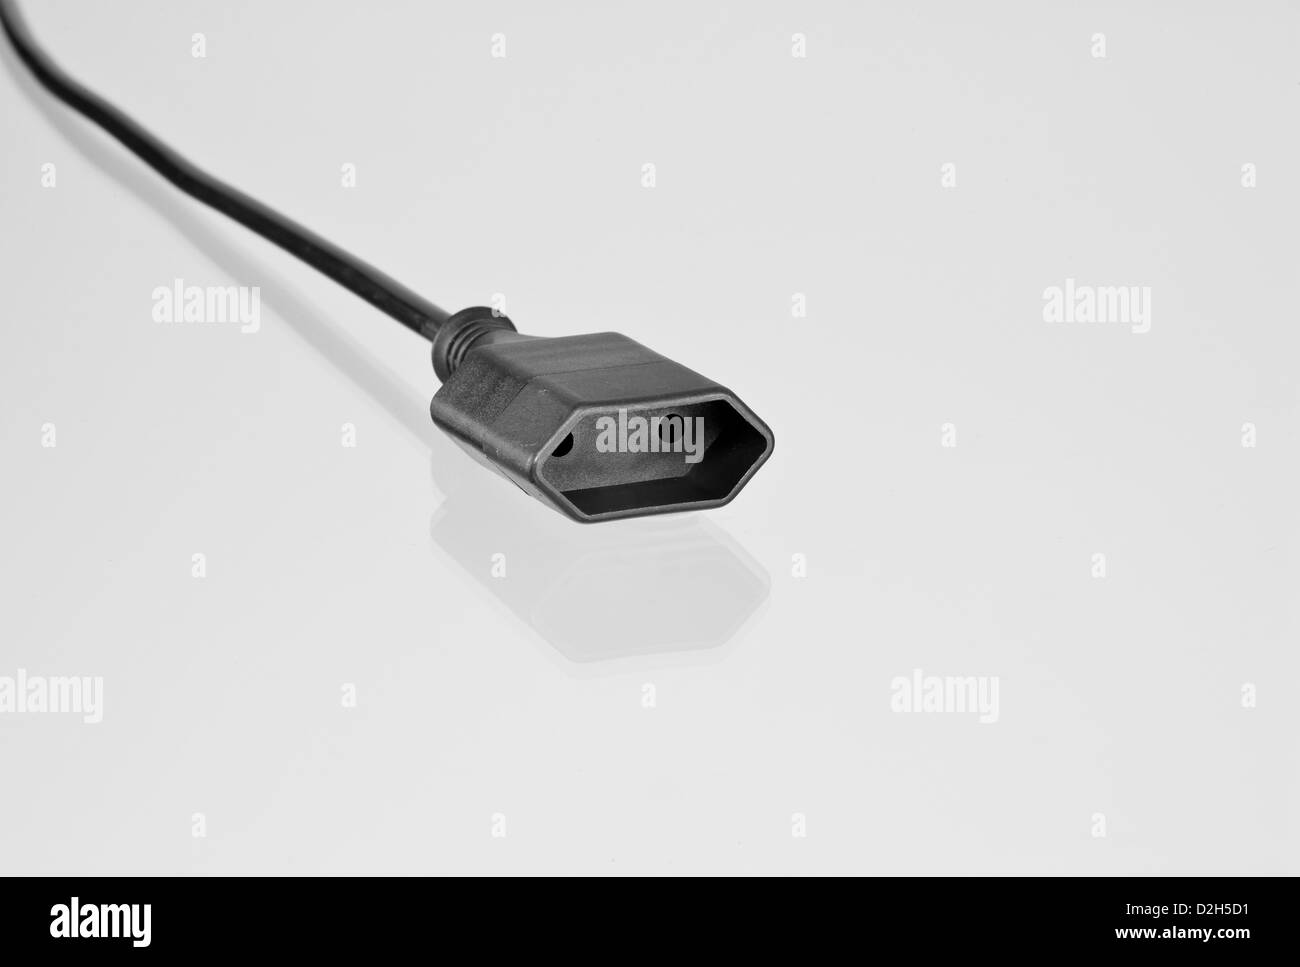 An extension cable for a C-connector plug Stock Photo